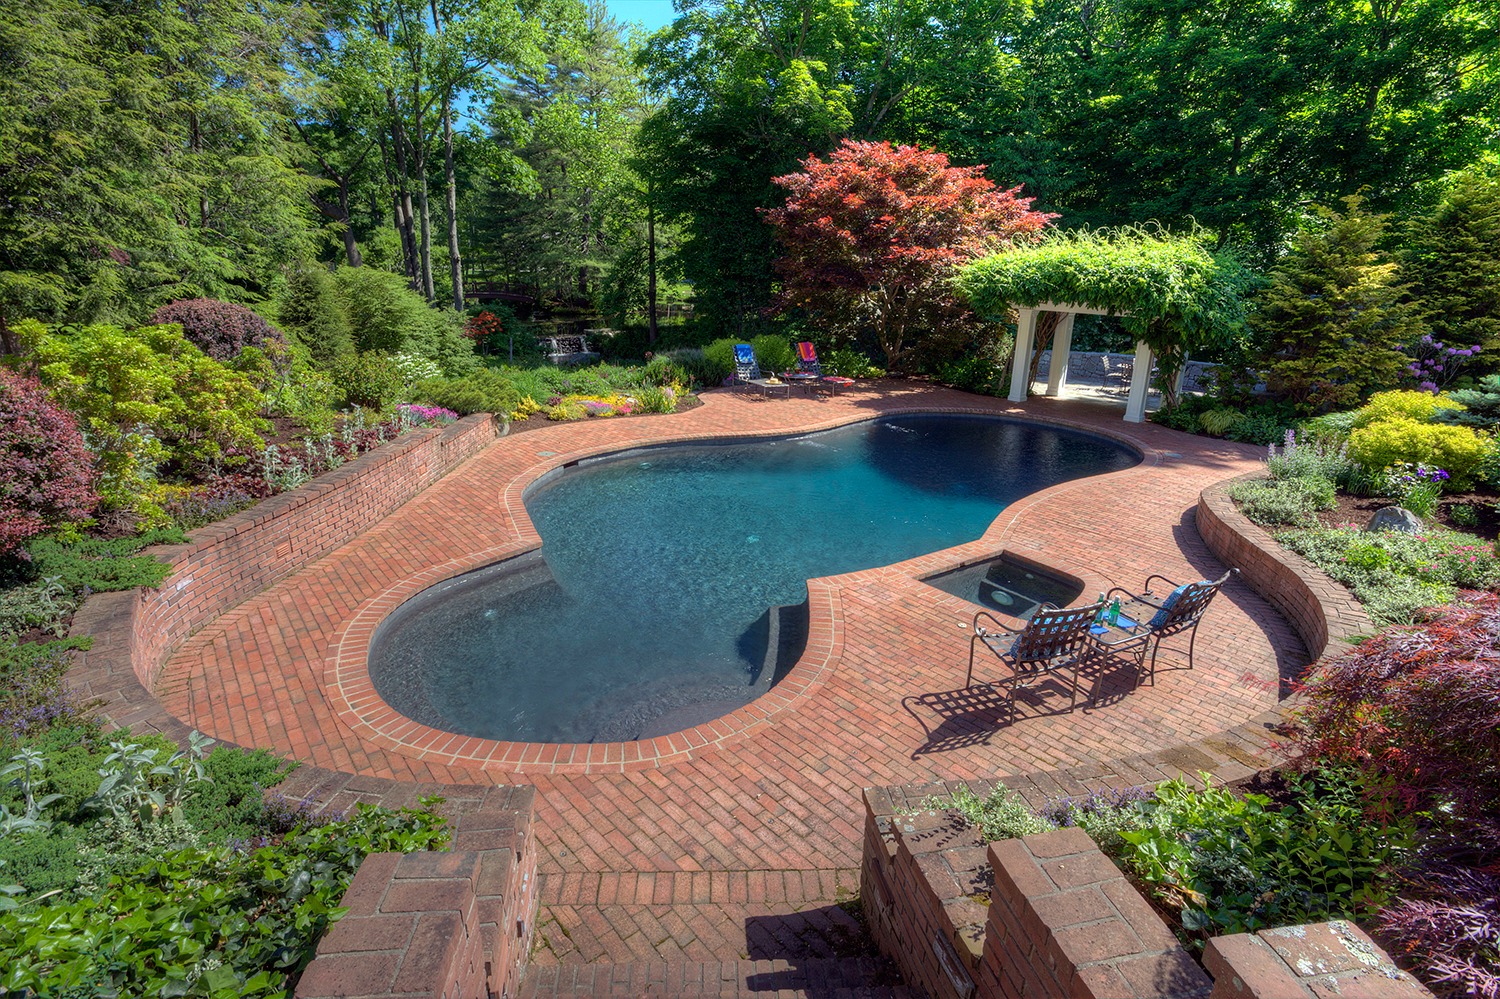 A kidney-shaped swimming pool surrounded by a brick patio and lush garden. Features include a covered pergola, outdoor furniture, and diverse plants.